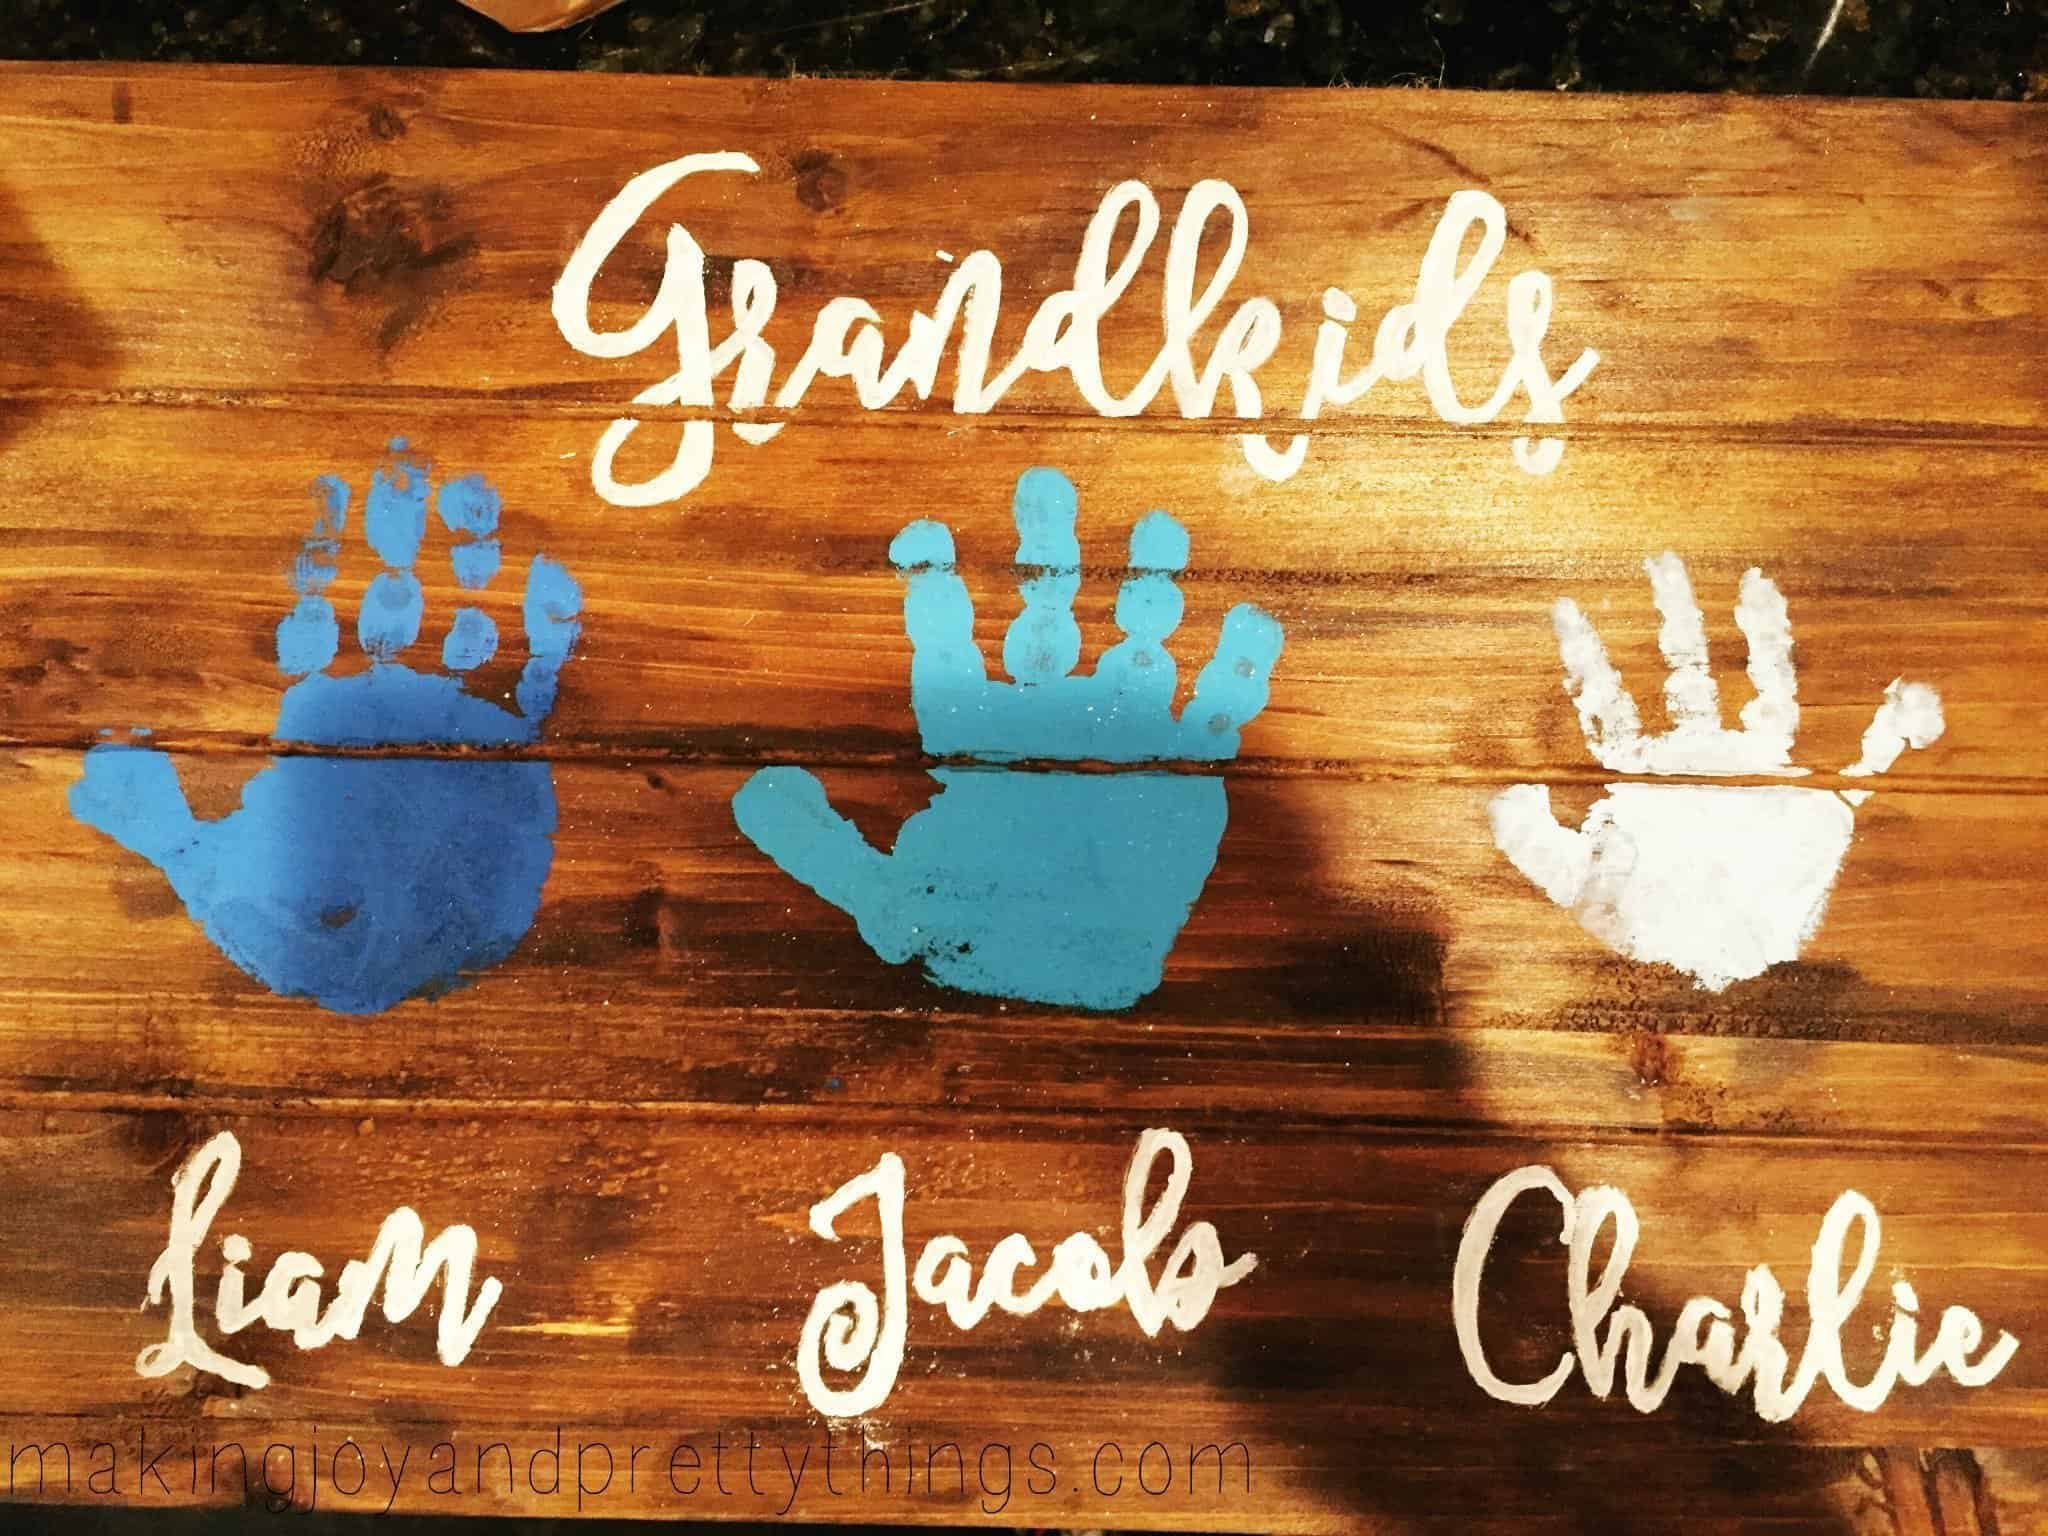 If you have a hard time coming up with gifts for Grandma look no further than this tutorial for a great handprint idea that's personal